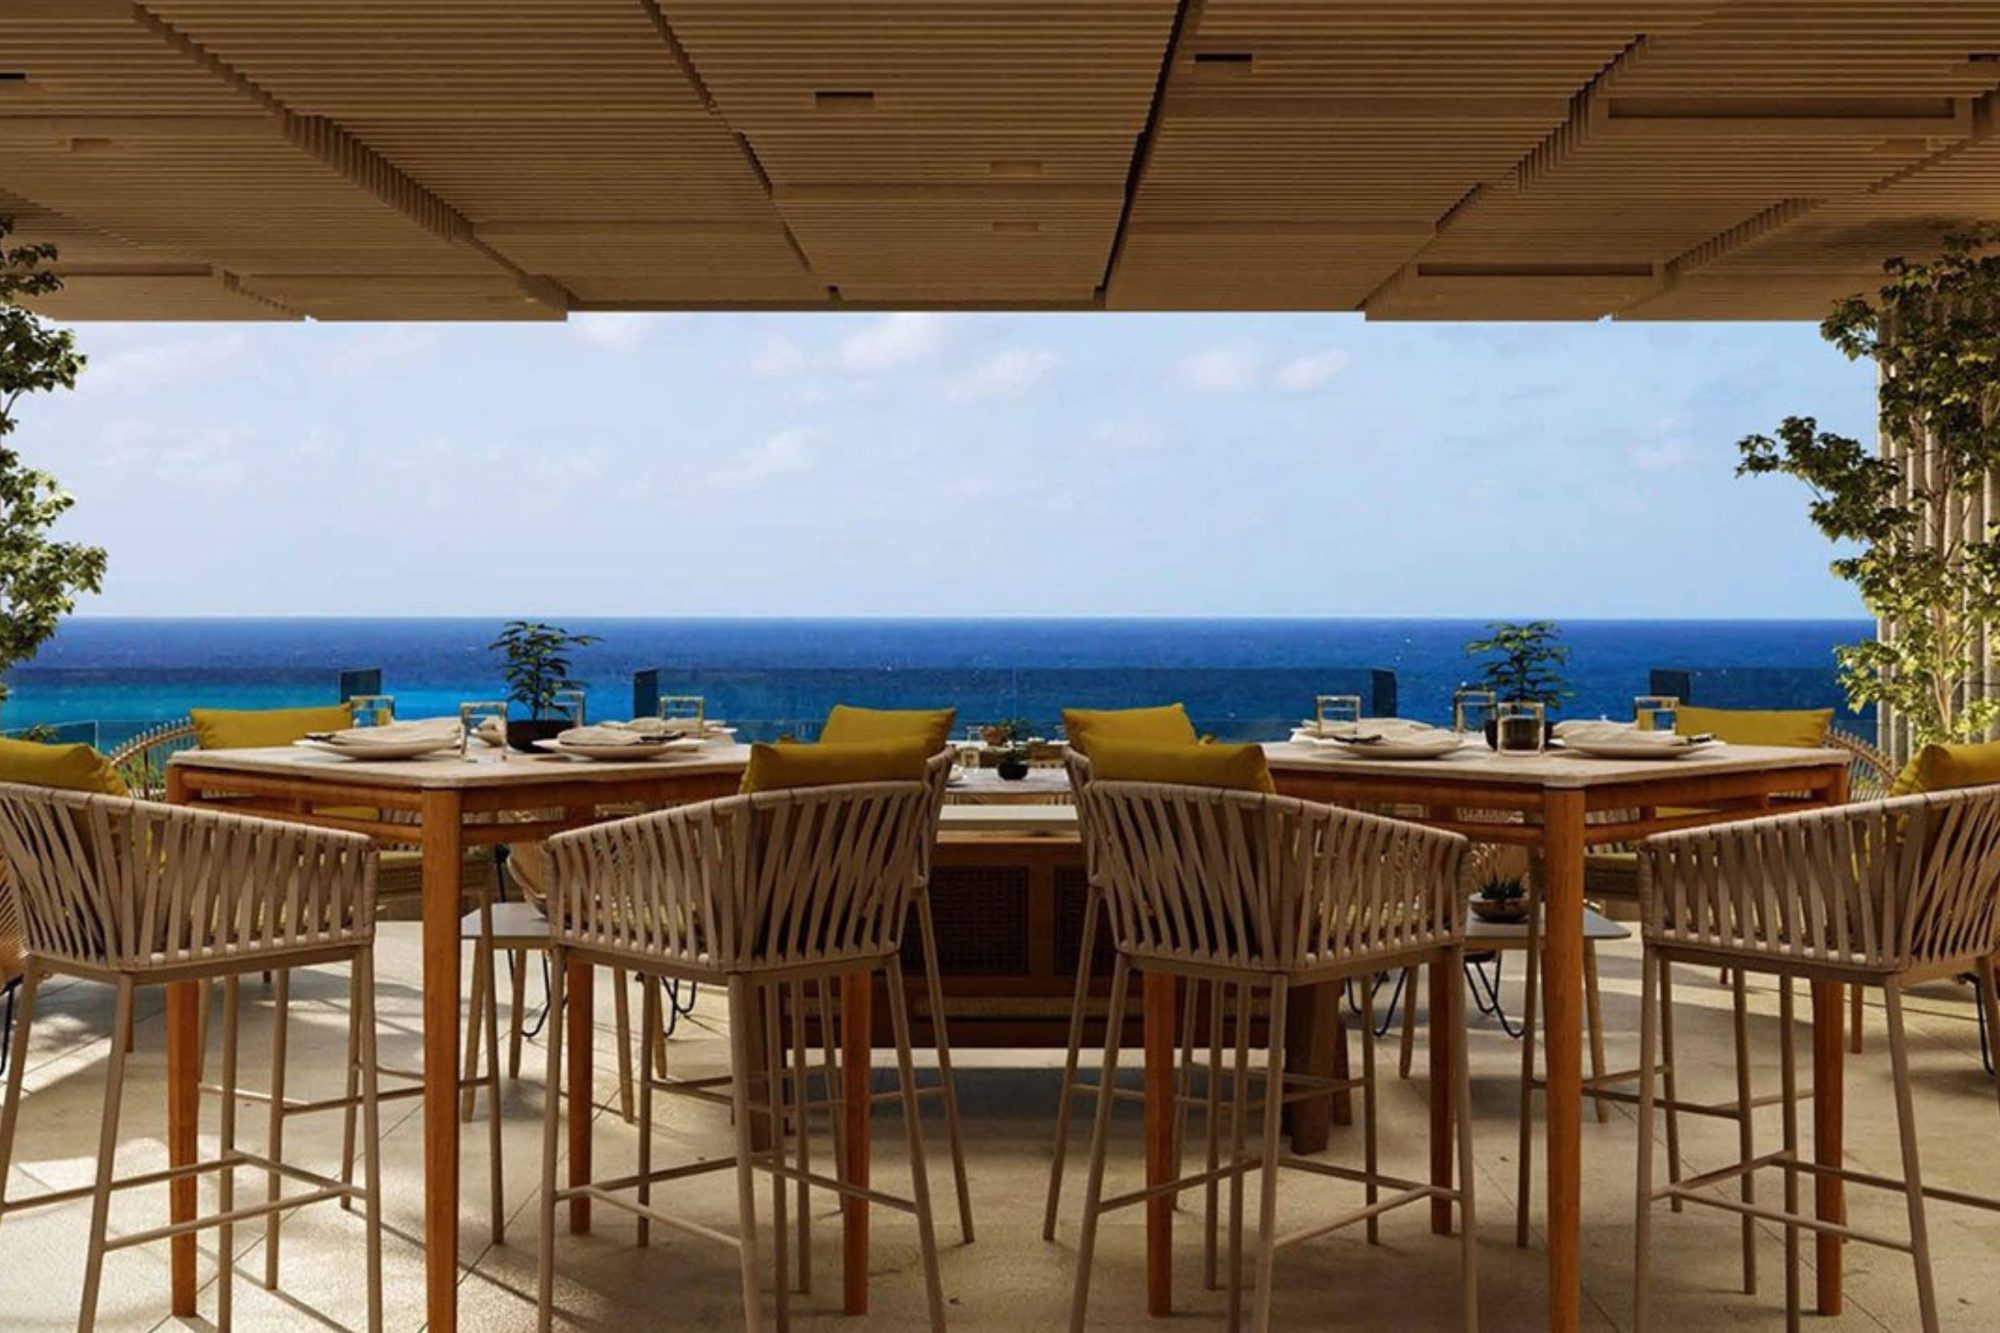 Grand Velas Boutique Los Cabos is set to debut in late 2023